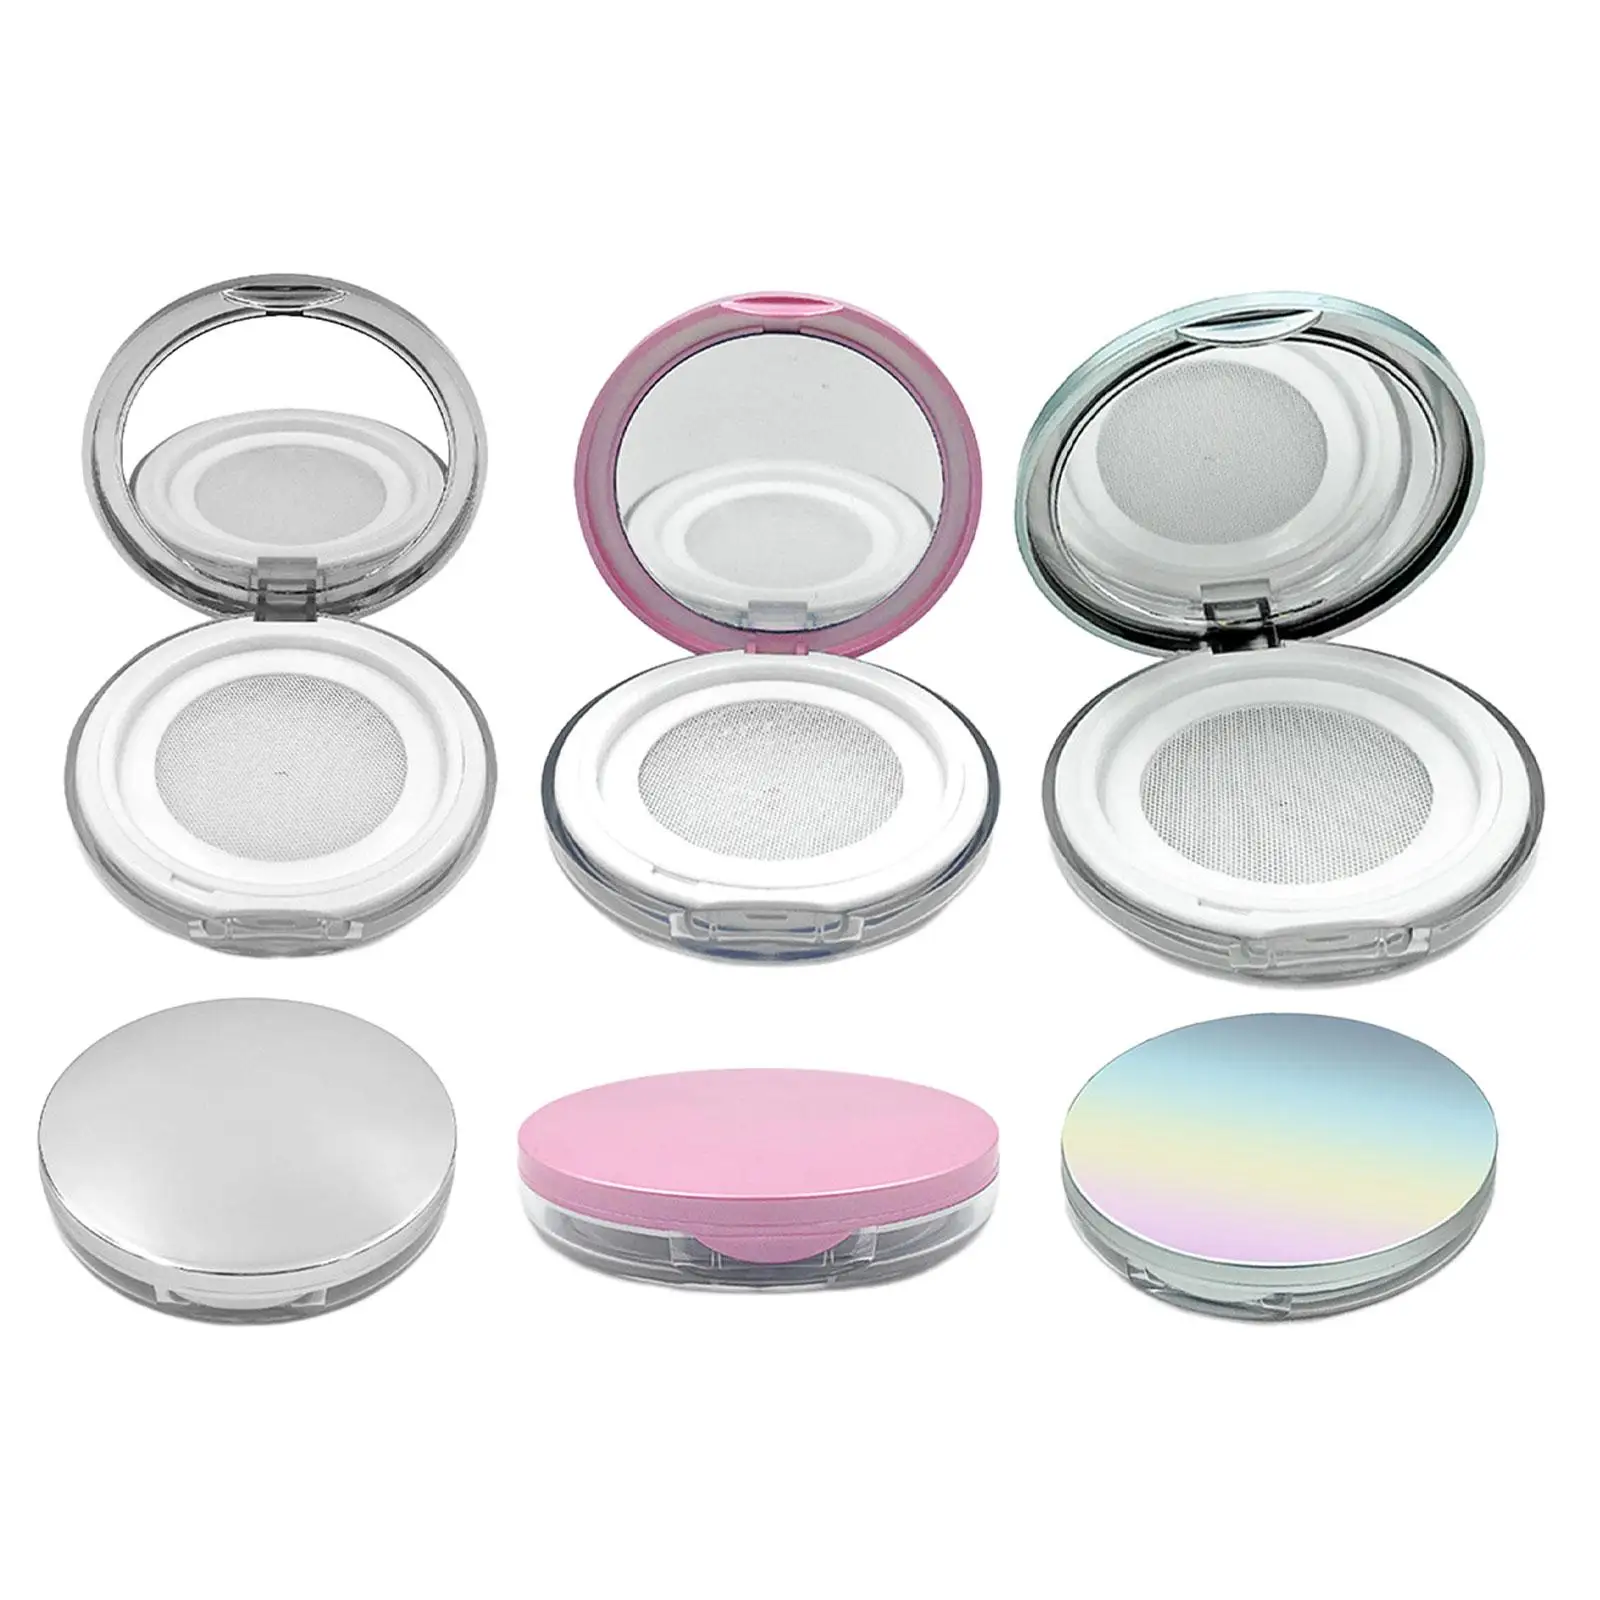 2 Pieces Makeup Loose Powder Case Container Compact 3G for Woman 7.6x1.6cm